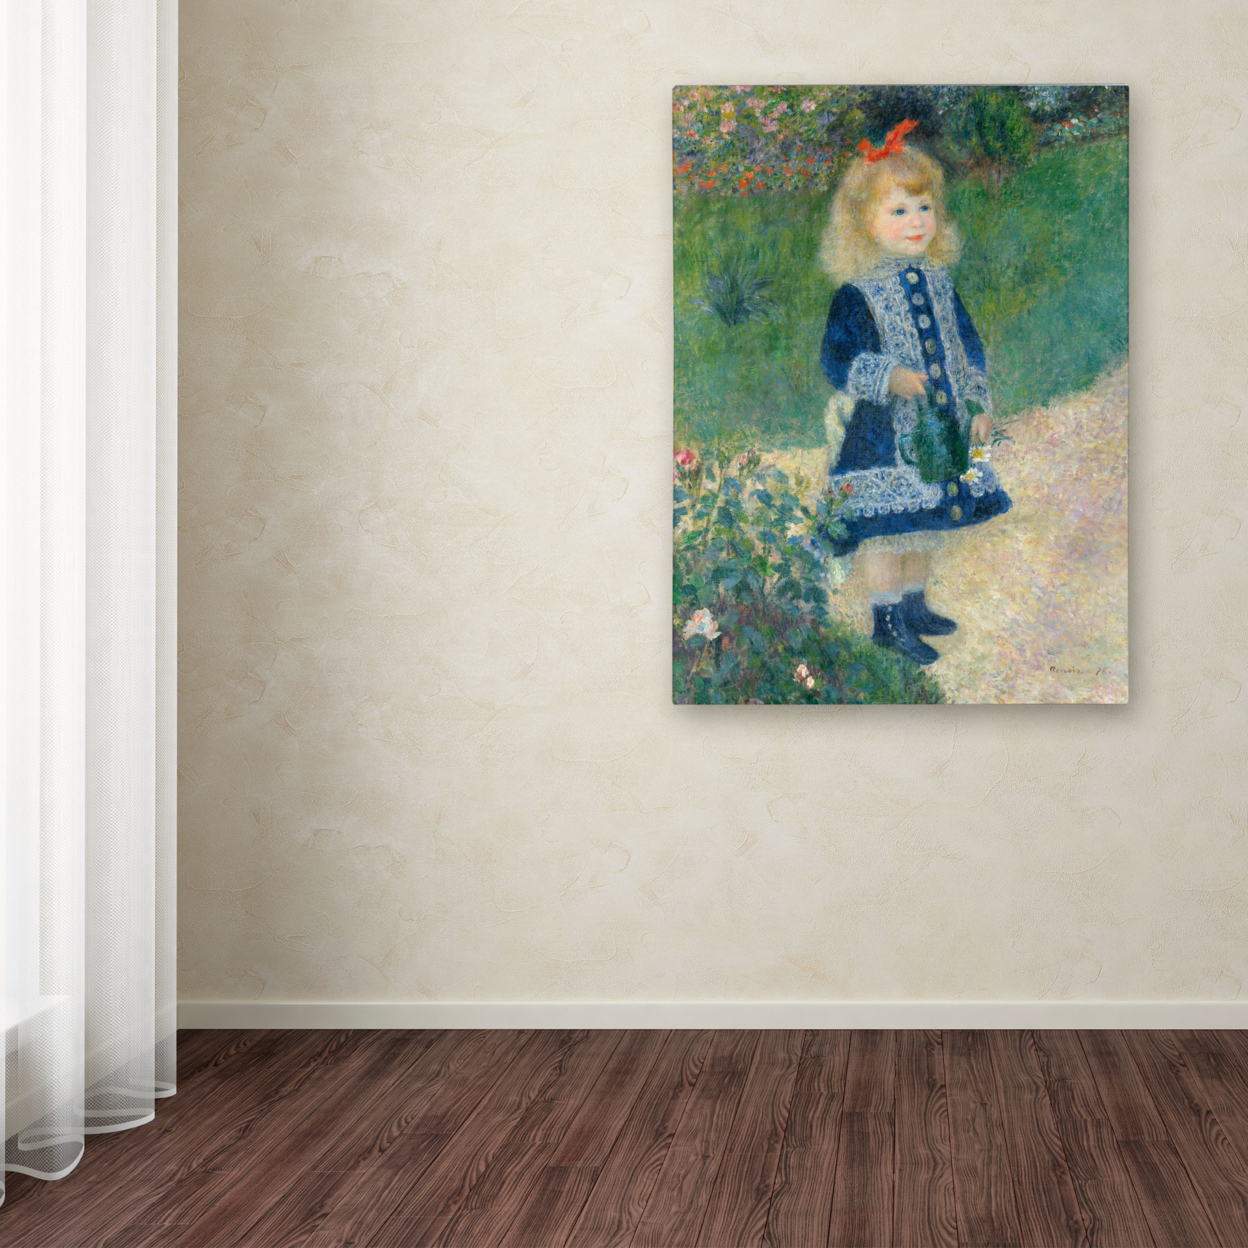 Pierre Renoir 'A Girl With A Watering Can' Canvas Wall Art 35 X 47 Inches